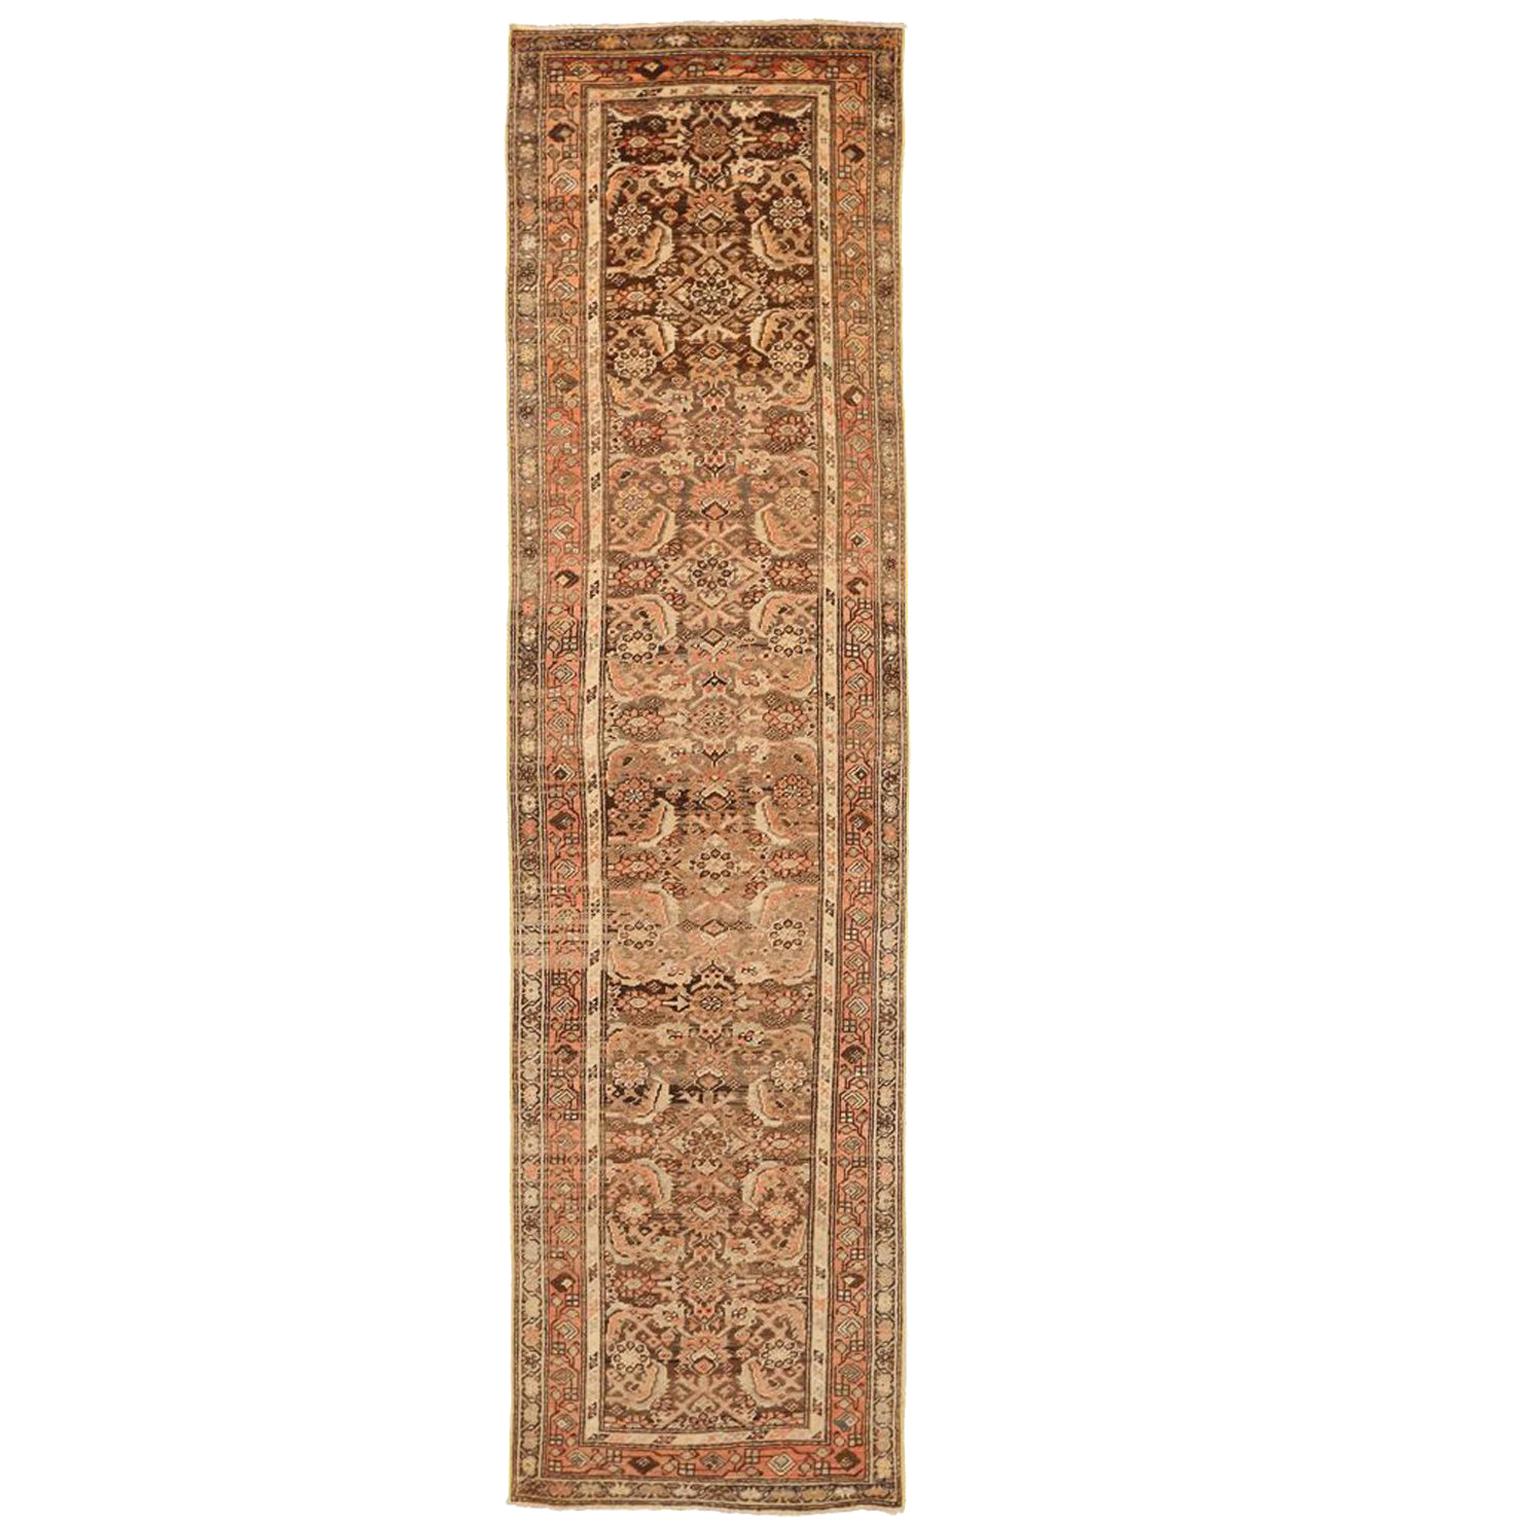 Antique Persian Rug Zanjan Style with Full Body Design, circa 1930s For Sale